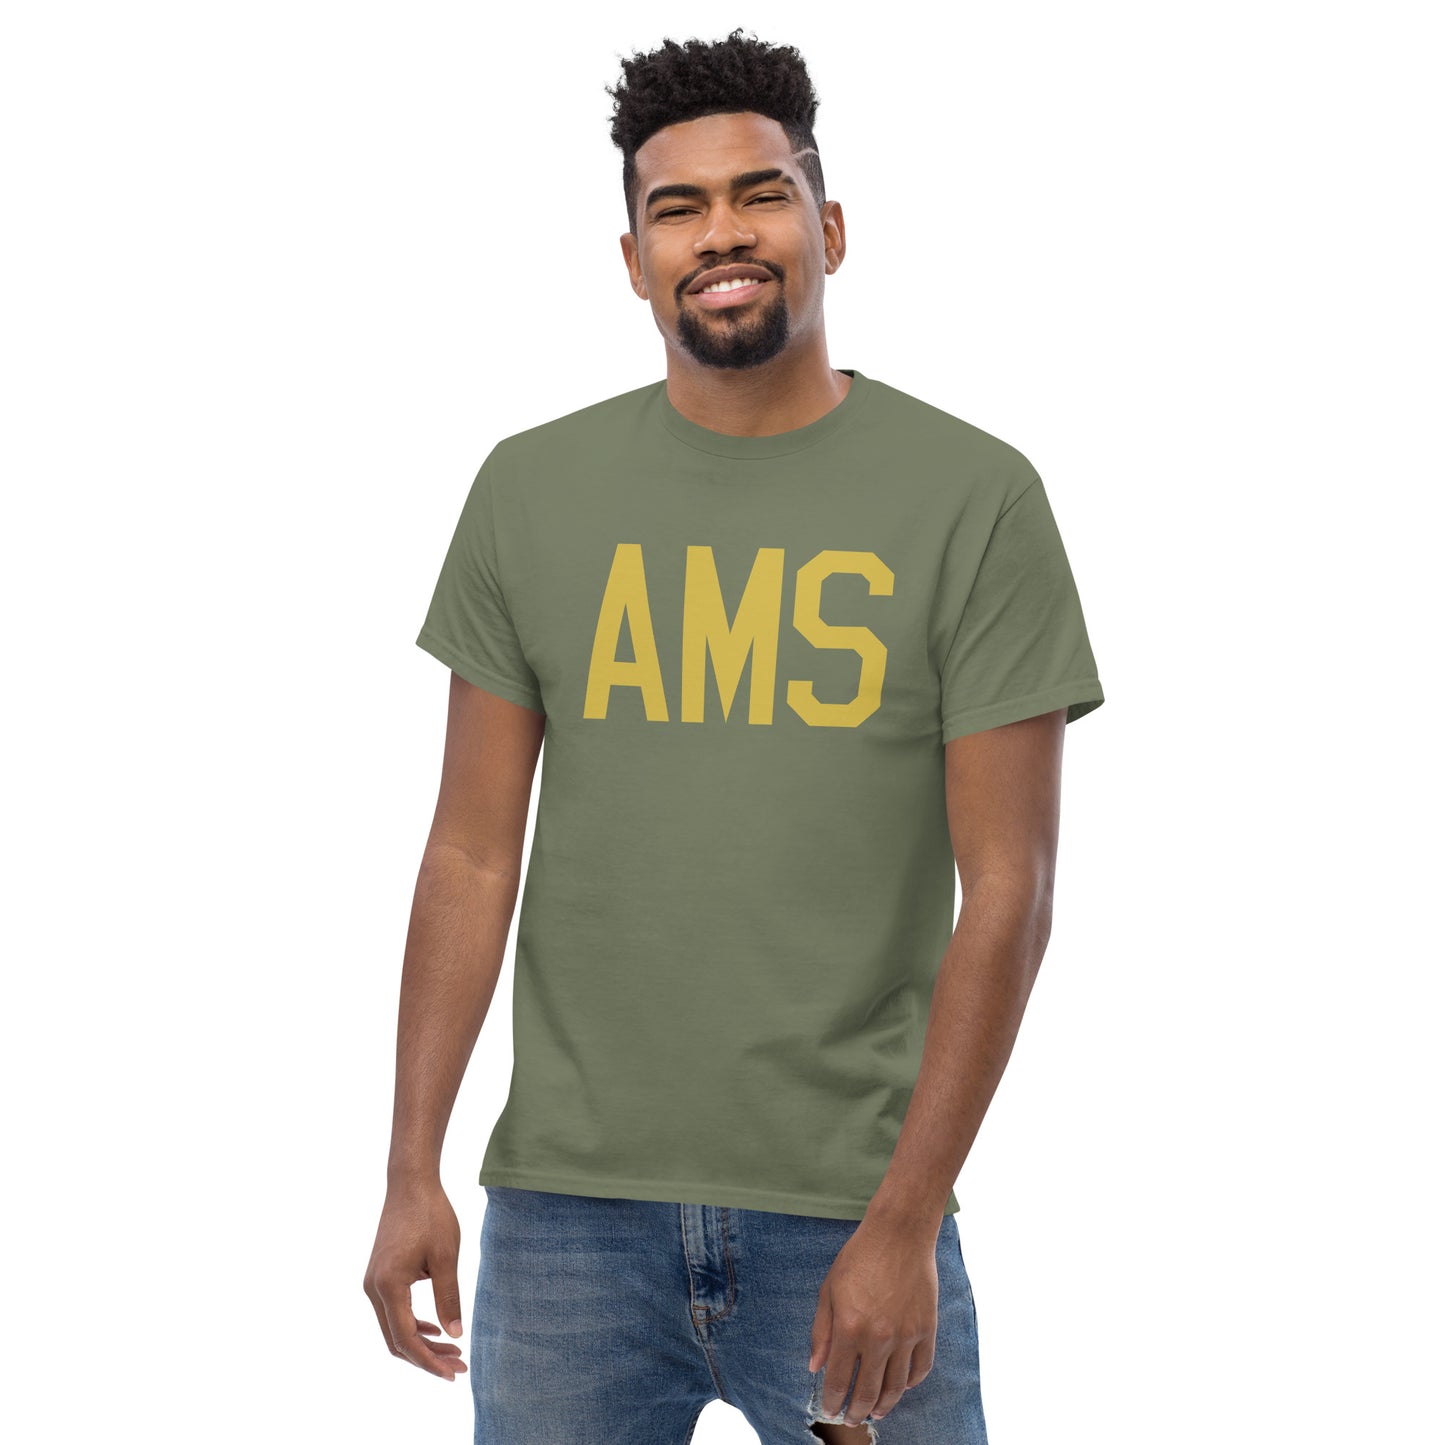 Aviation Enthusiast Men's Tee - Old Gold Graphic • AMS Amsterdam • YHM Designs - Image 06